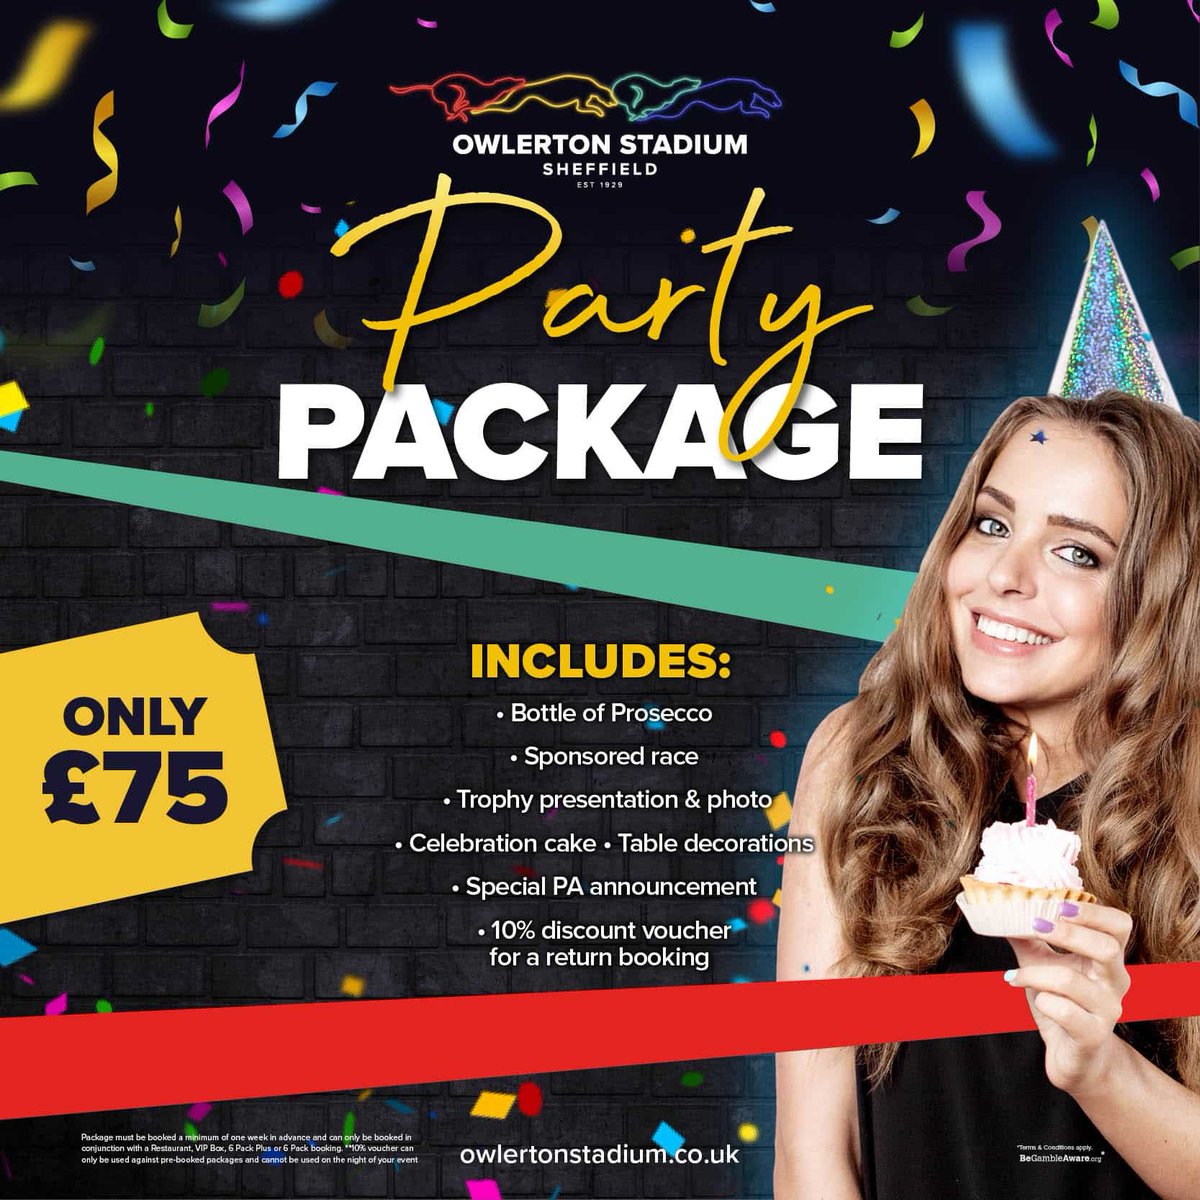 Why not add a #PartyPackage to your celebration with us? 🎉 

Our packages are designed to make your event at Owlerton extra special - delivering maximum fun for your budget 🤩

Your perfect celebration awaits... ✨

#SheffieldOffer #LiveRacing #DrinksPackage #SponsoredRace